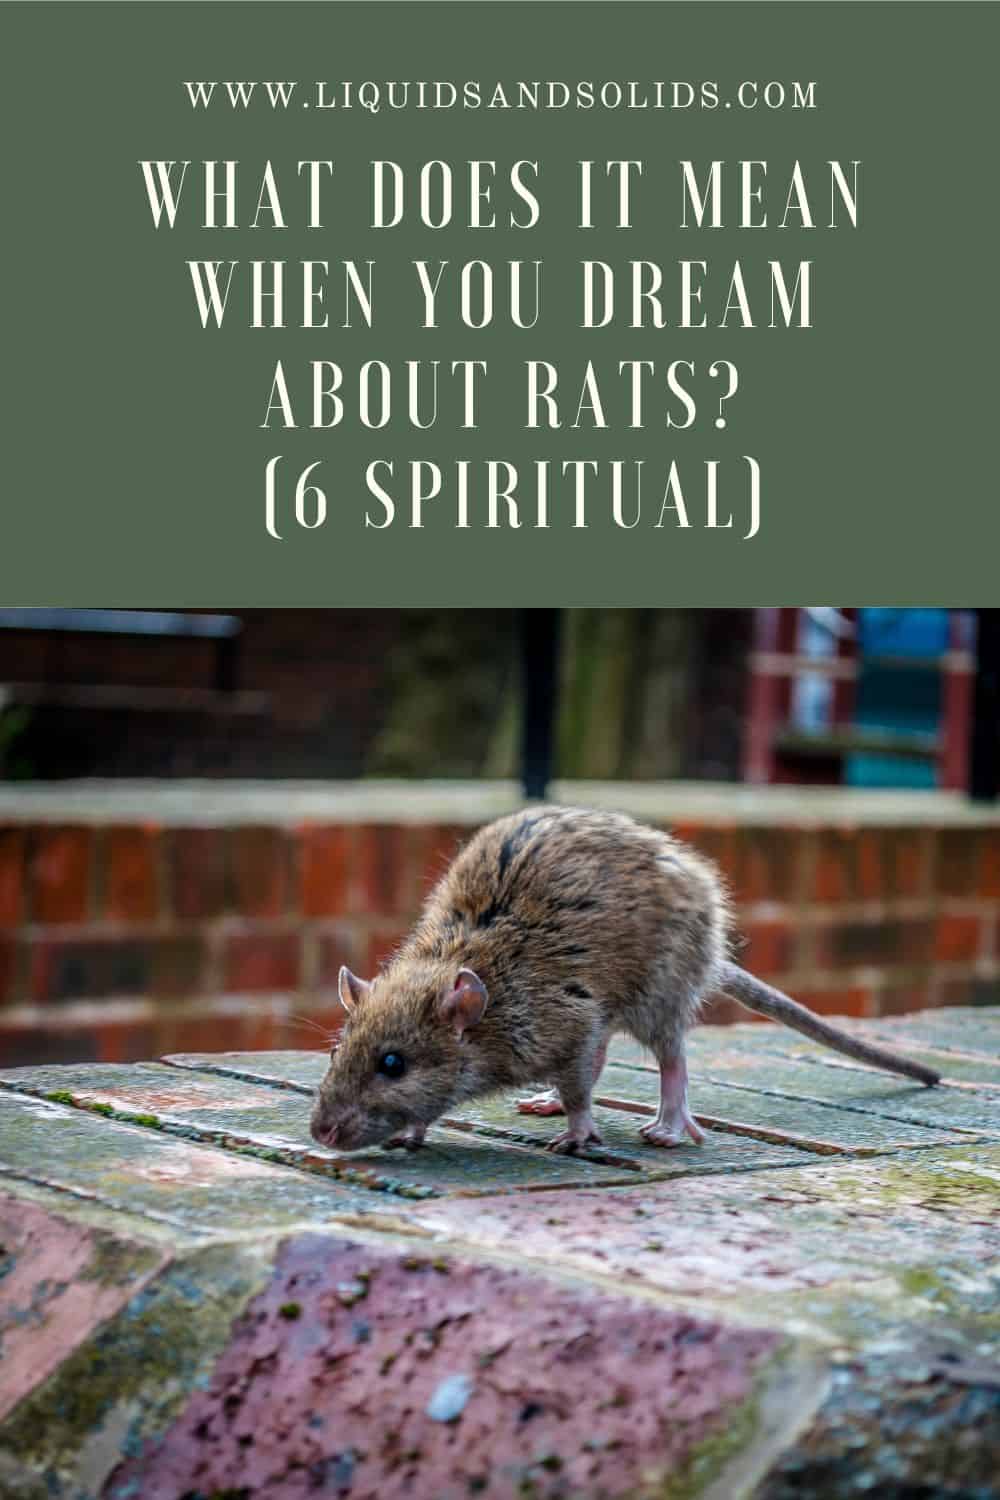 What Does it Mean When You Dream About Rats? (6 Spiritual)